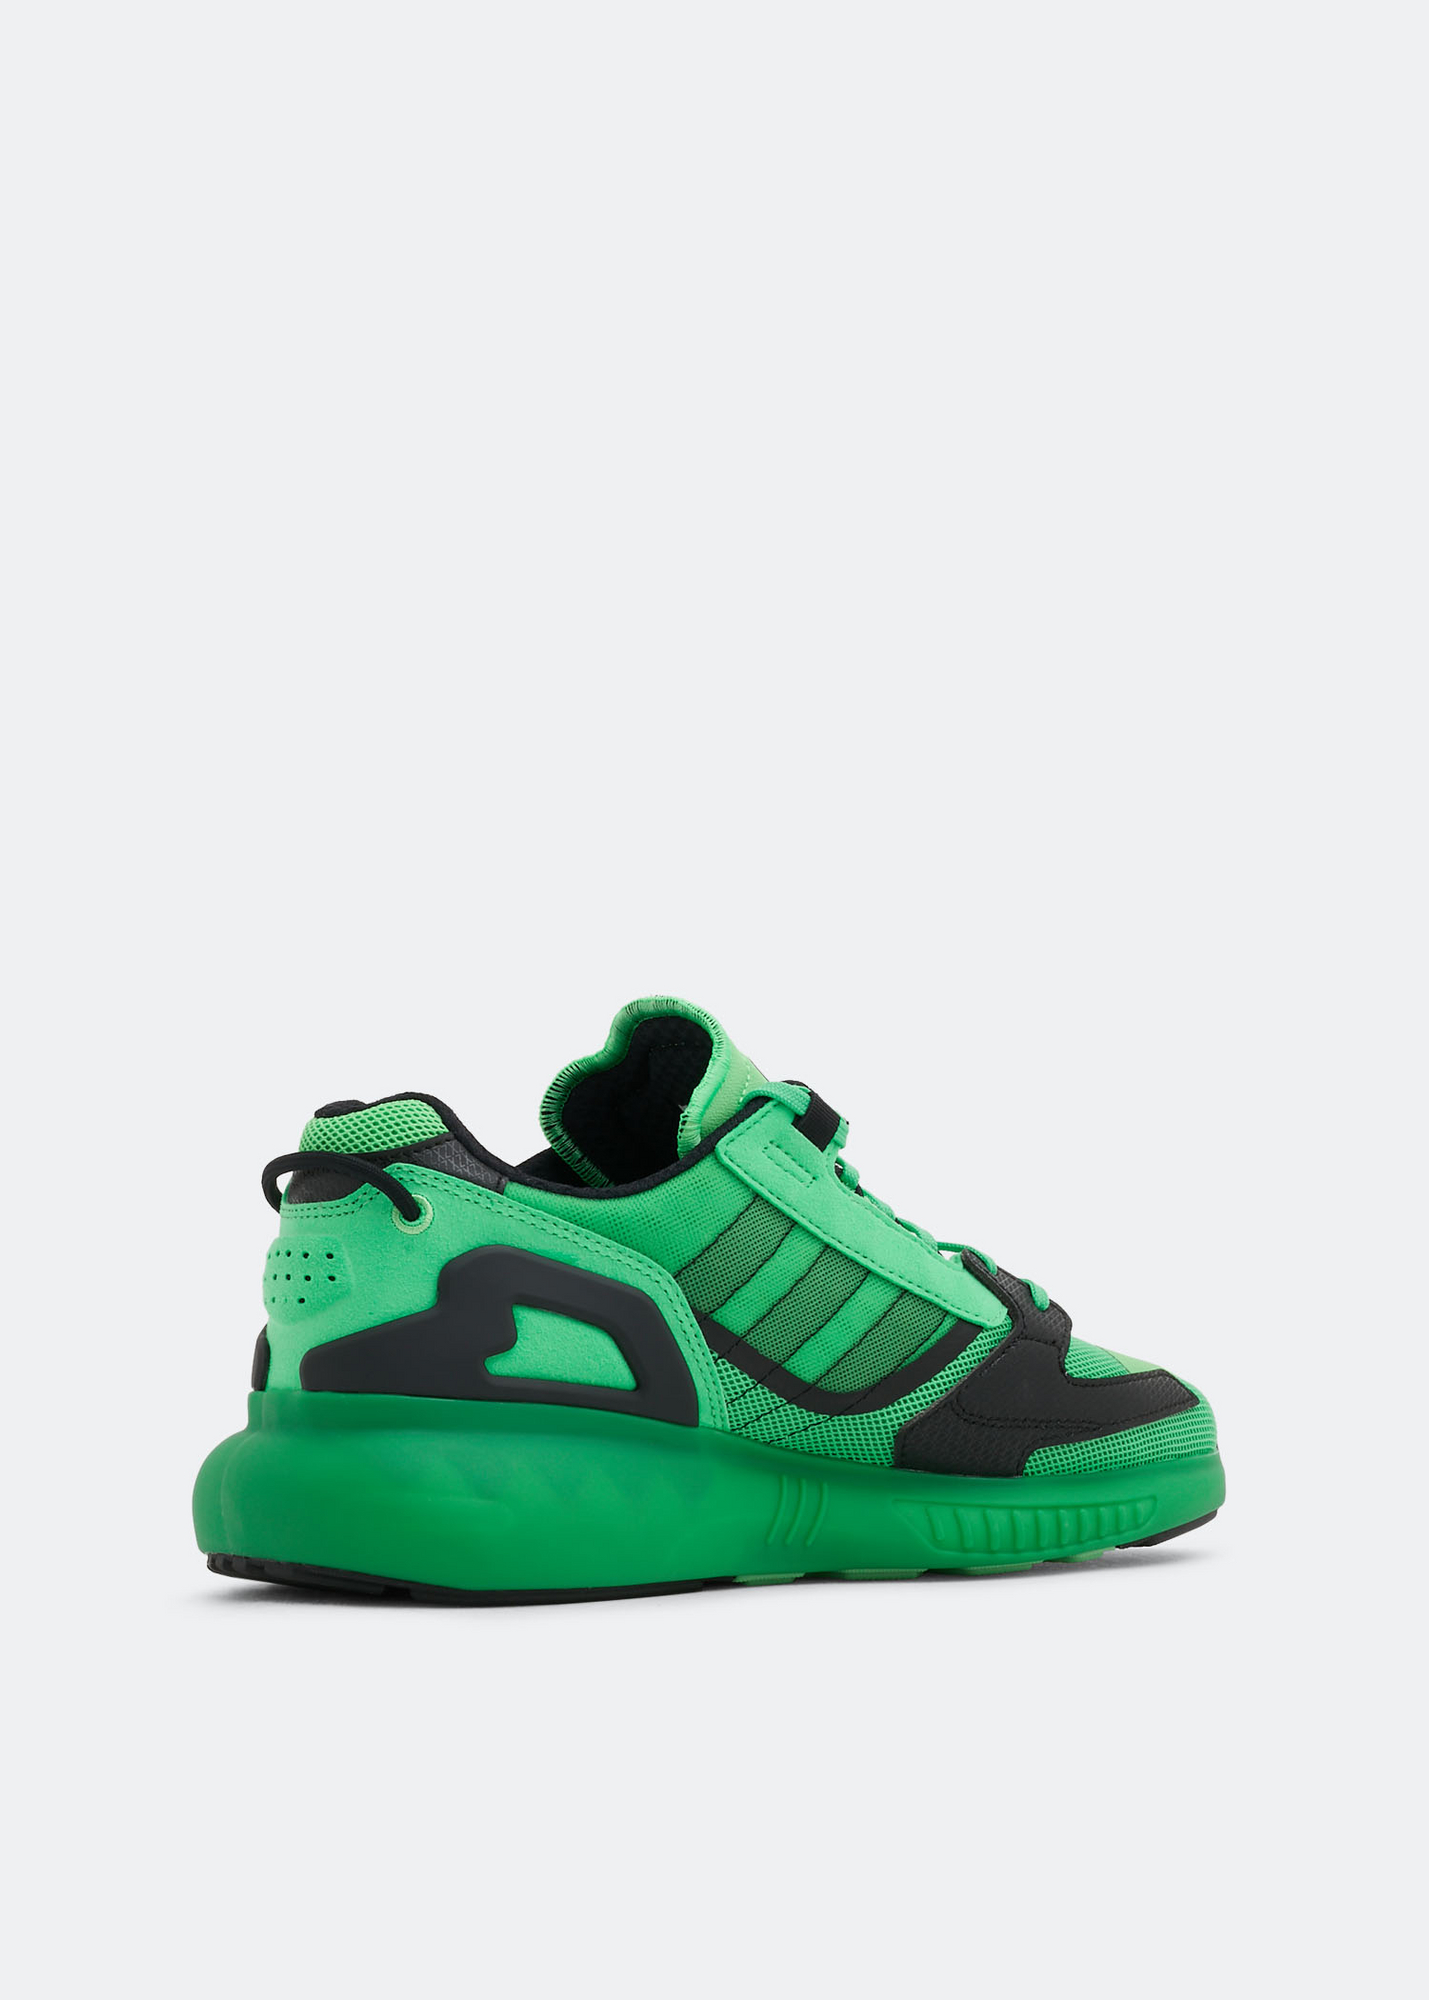 Adidas ZX 5K Boost sneakers for Men - Green in KSA | Level Shoes